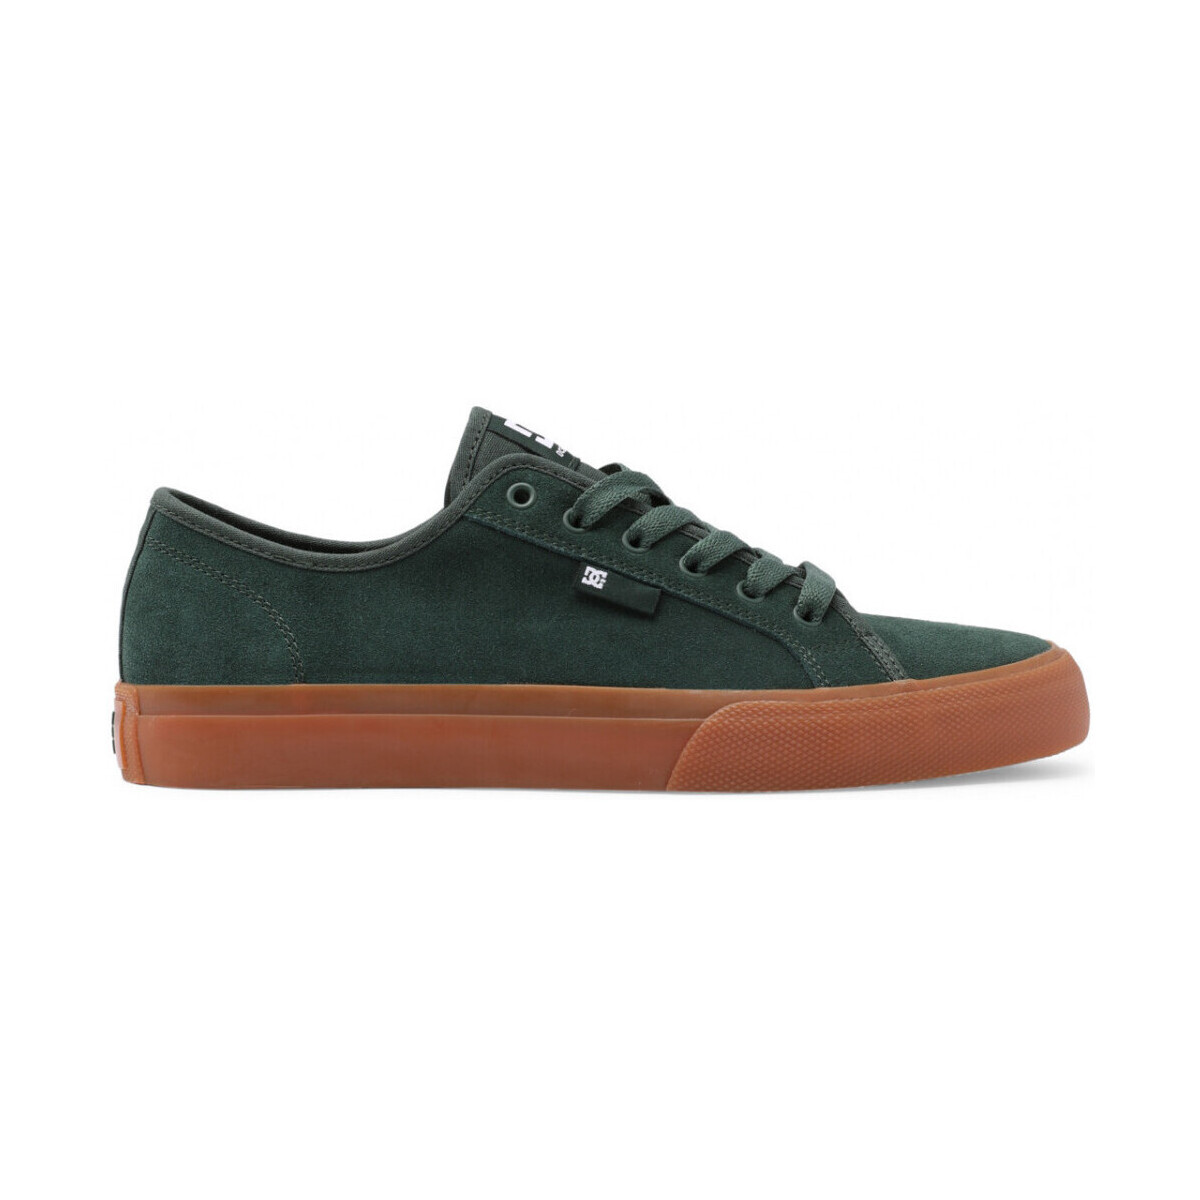 Chaussures Chaussures de Skate DC ritmo Shoes MANUAL LE forest green Vert